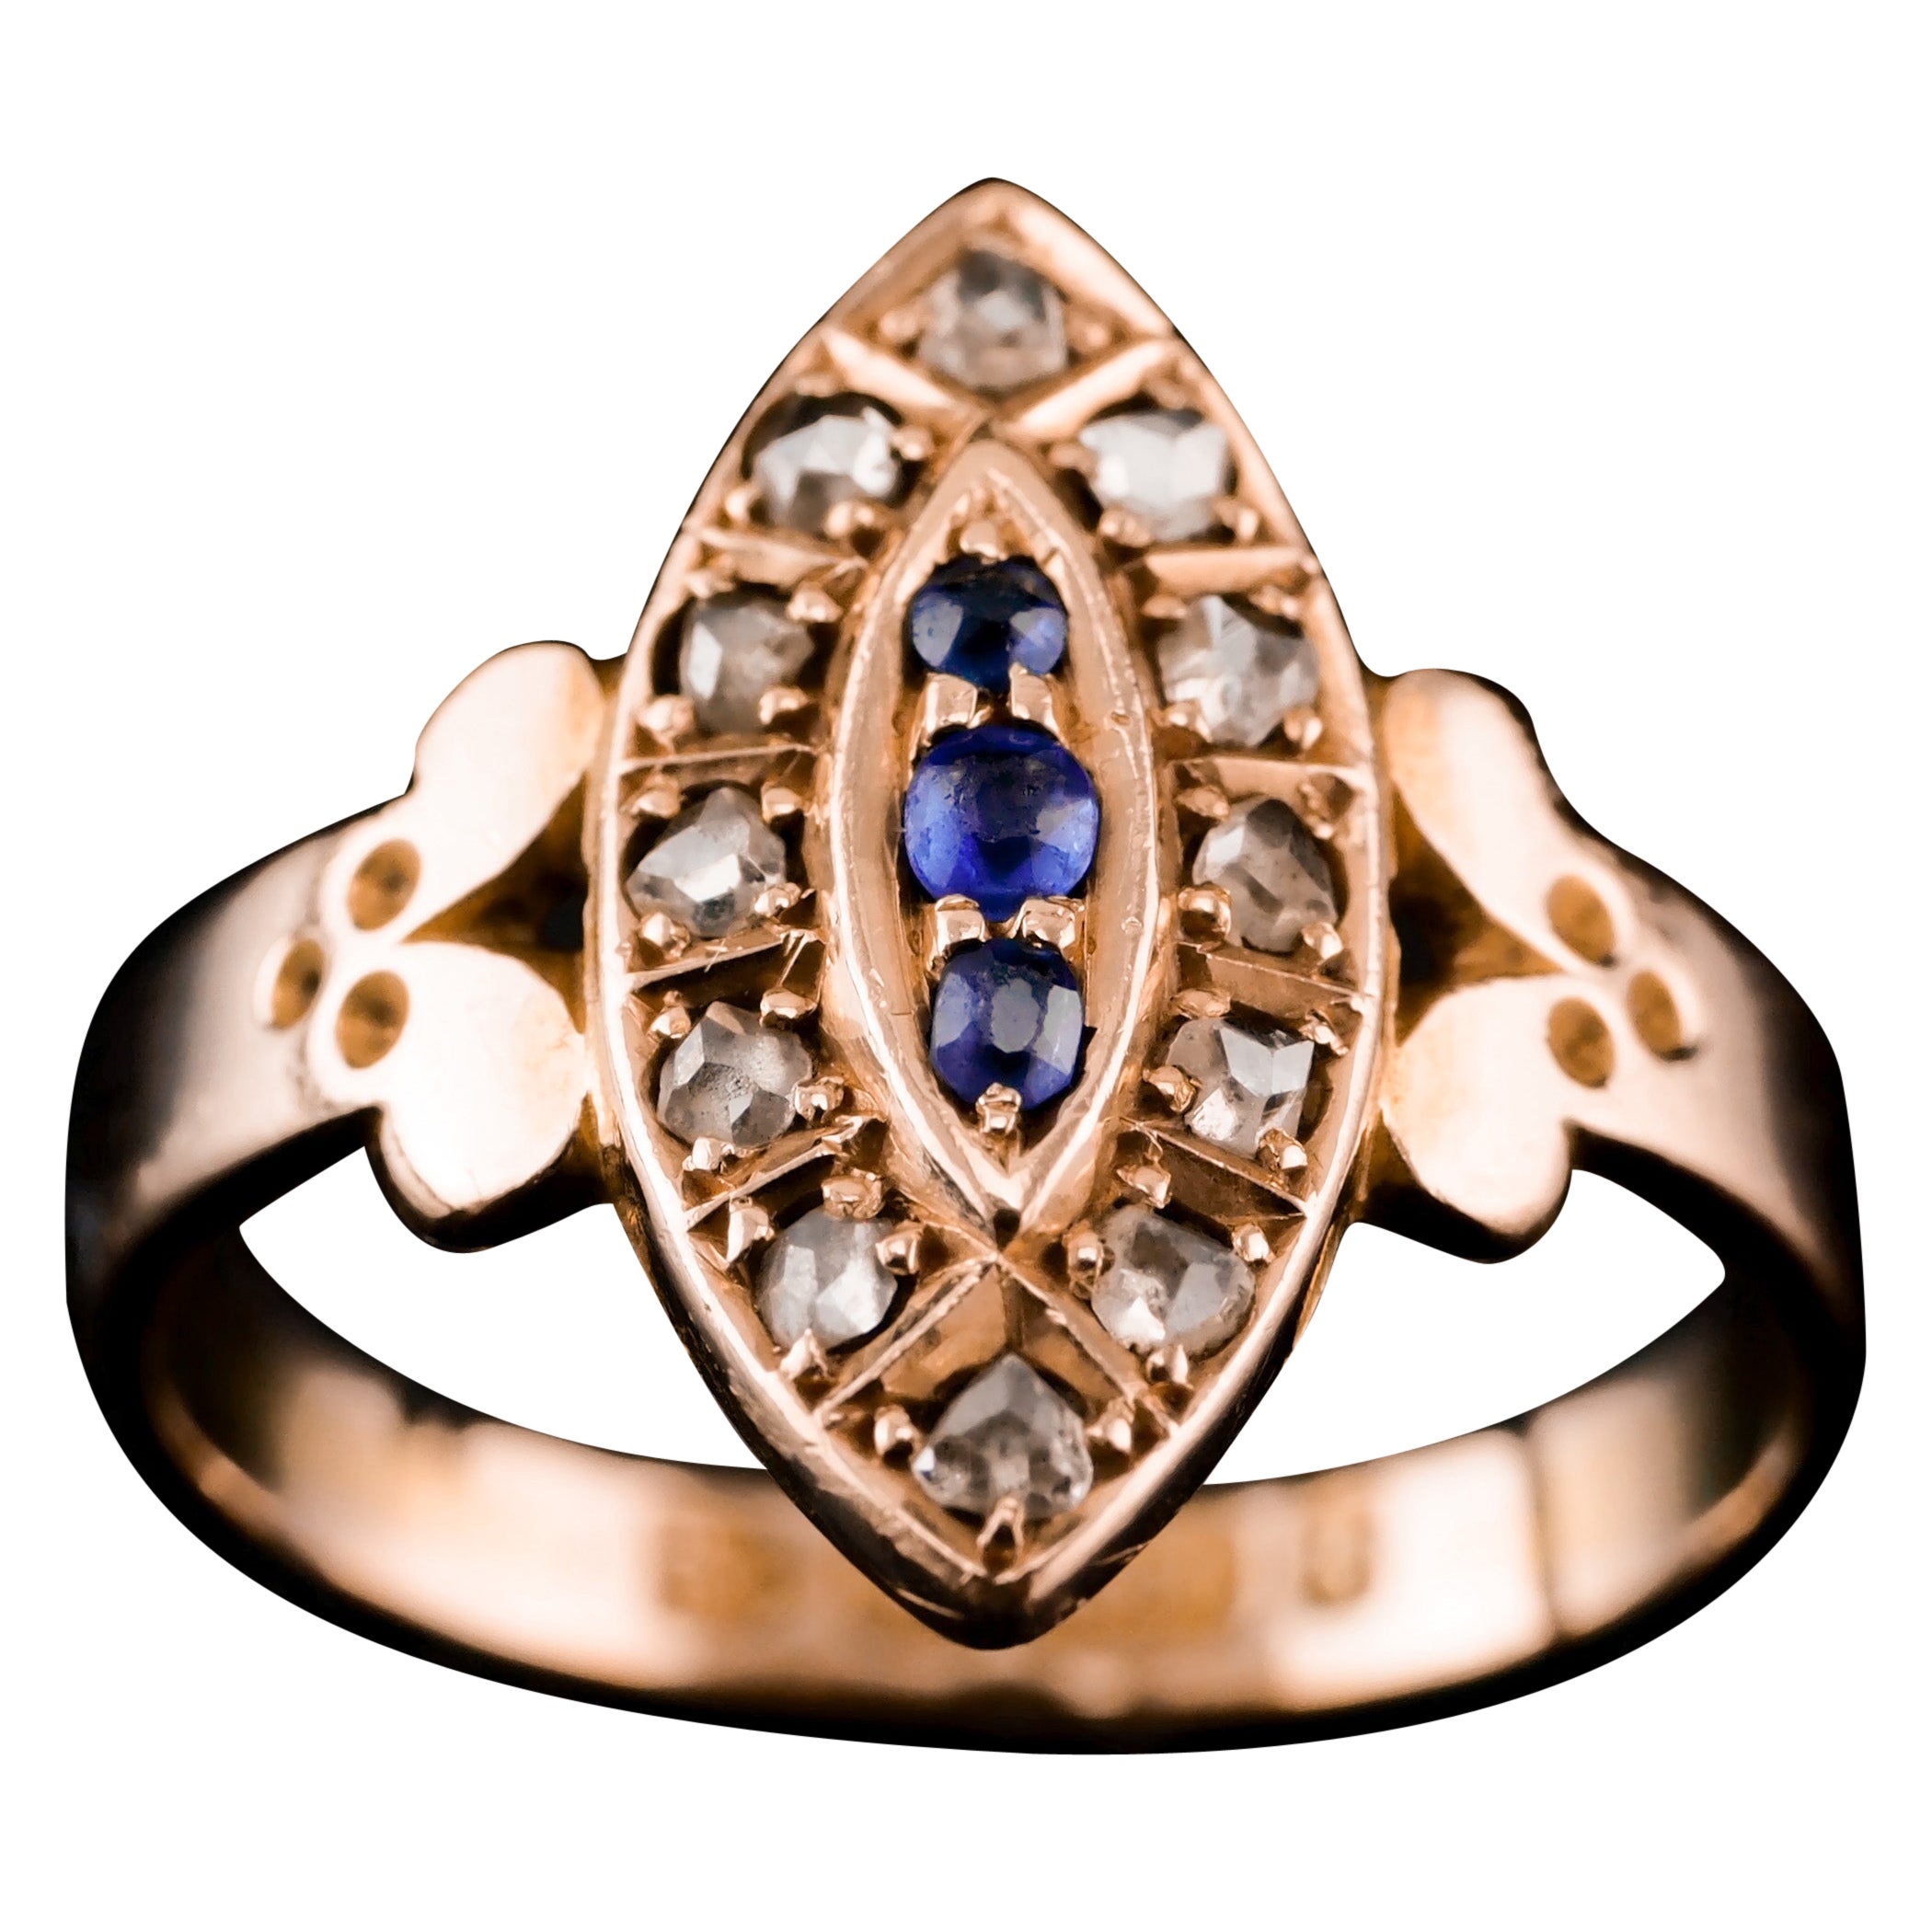 Antique Victorian 15k Sapphire and Diamond Navette Ring, Chester, 1893